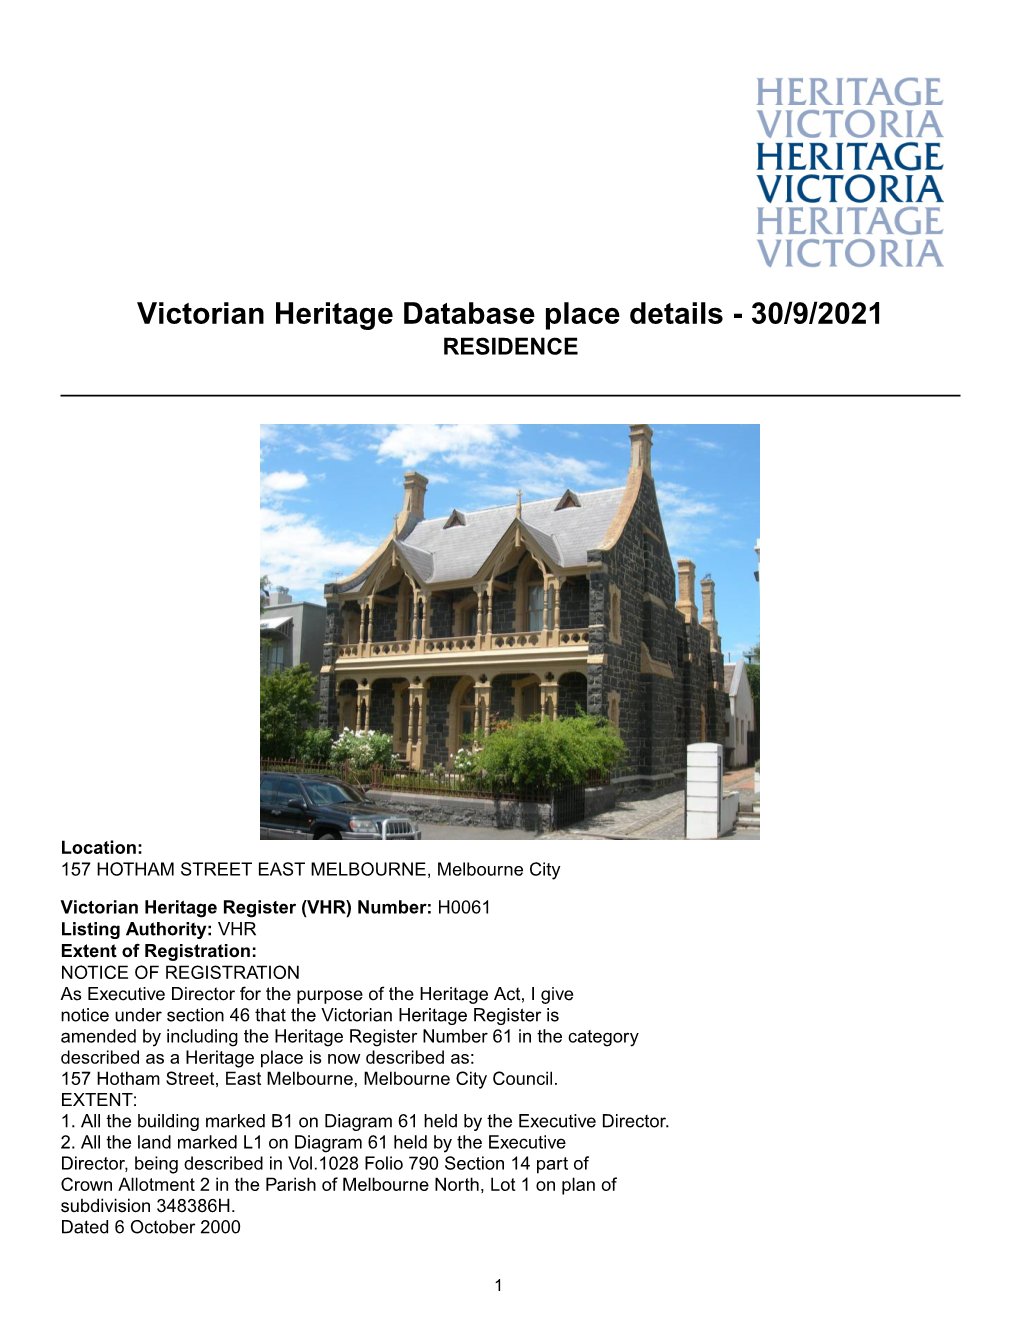 Victorian Heritage Database Place Details - 30/9/2021 RESIDENCE